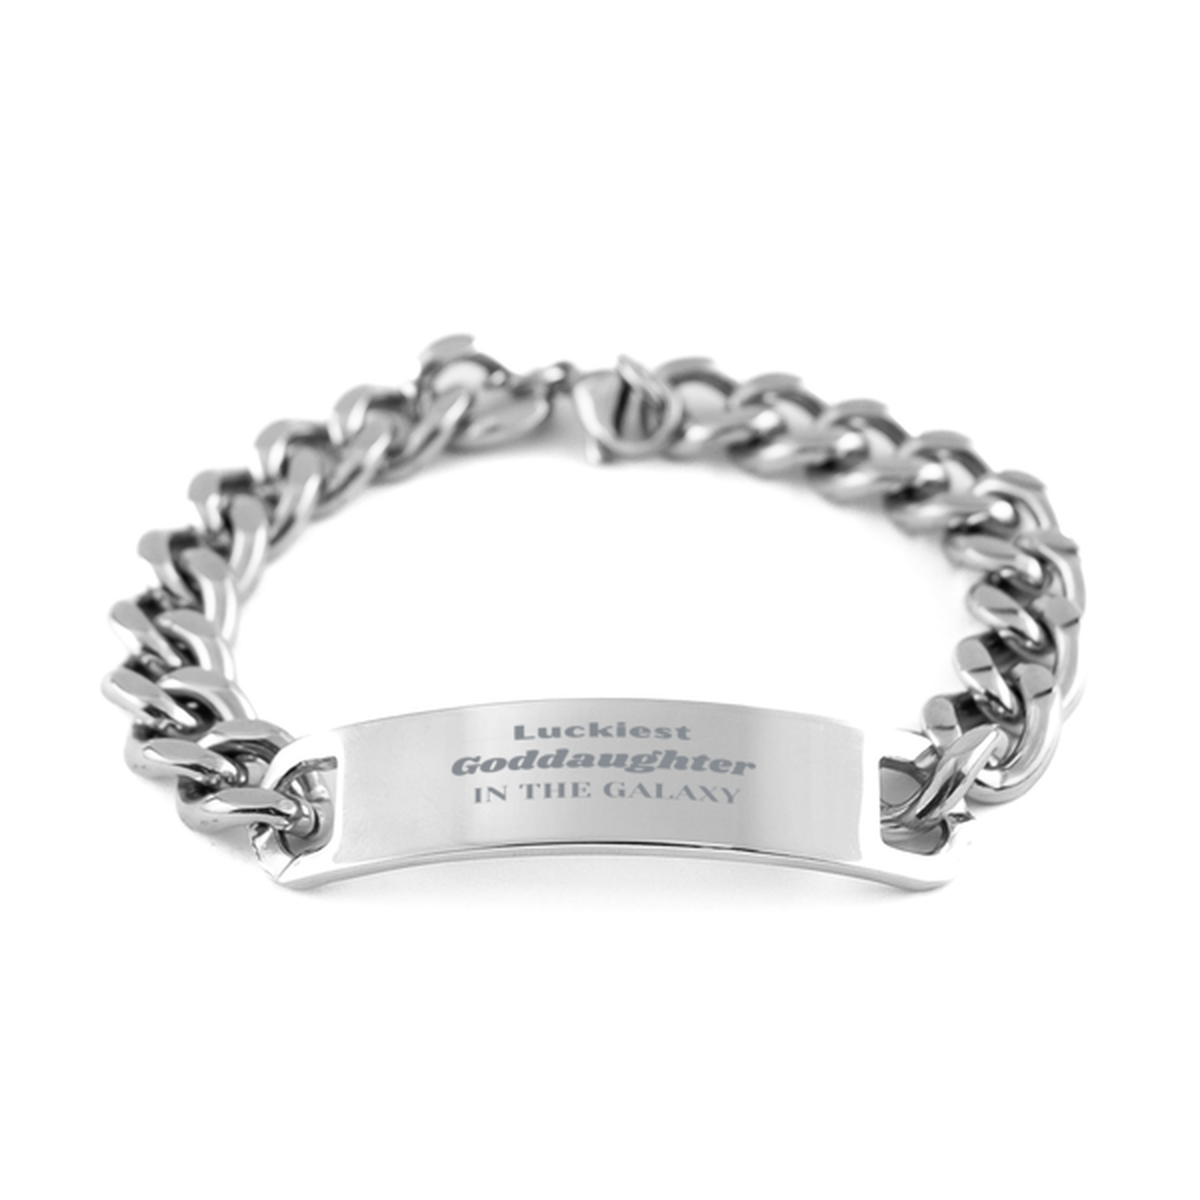 Luckiest Goddaughter in the Galaxy, To My Goddaughter Engraved Gifts, Christmas Goddaughter Cuban Chain Stainless Steel Bracelet Gifts, X-mas Birthday Unique Gifts For Goddaughter Men Women